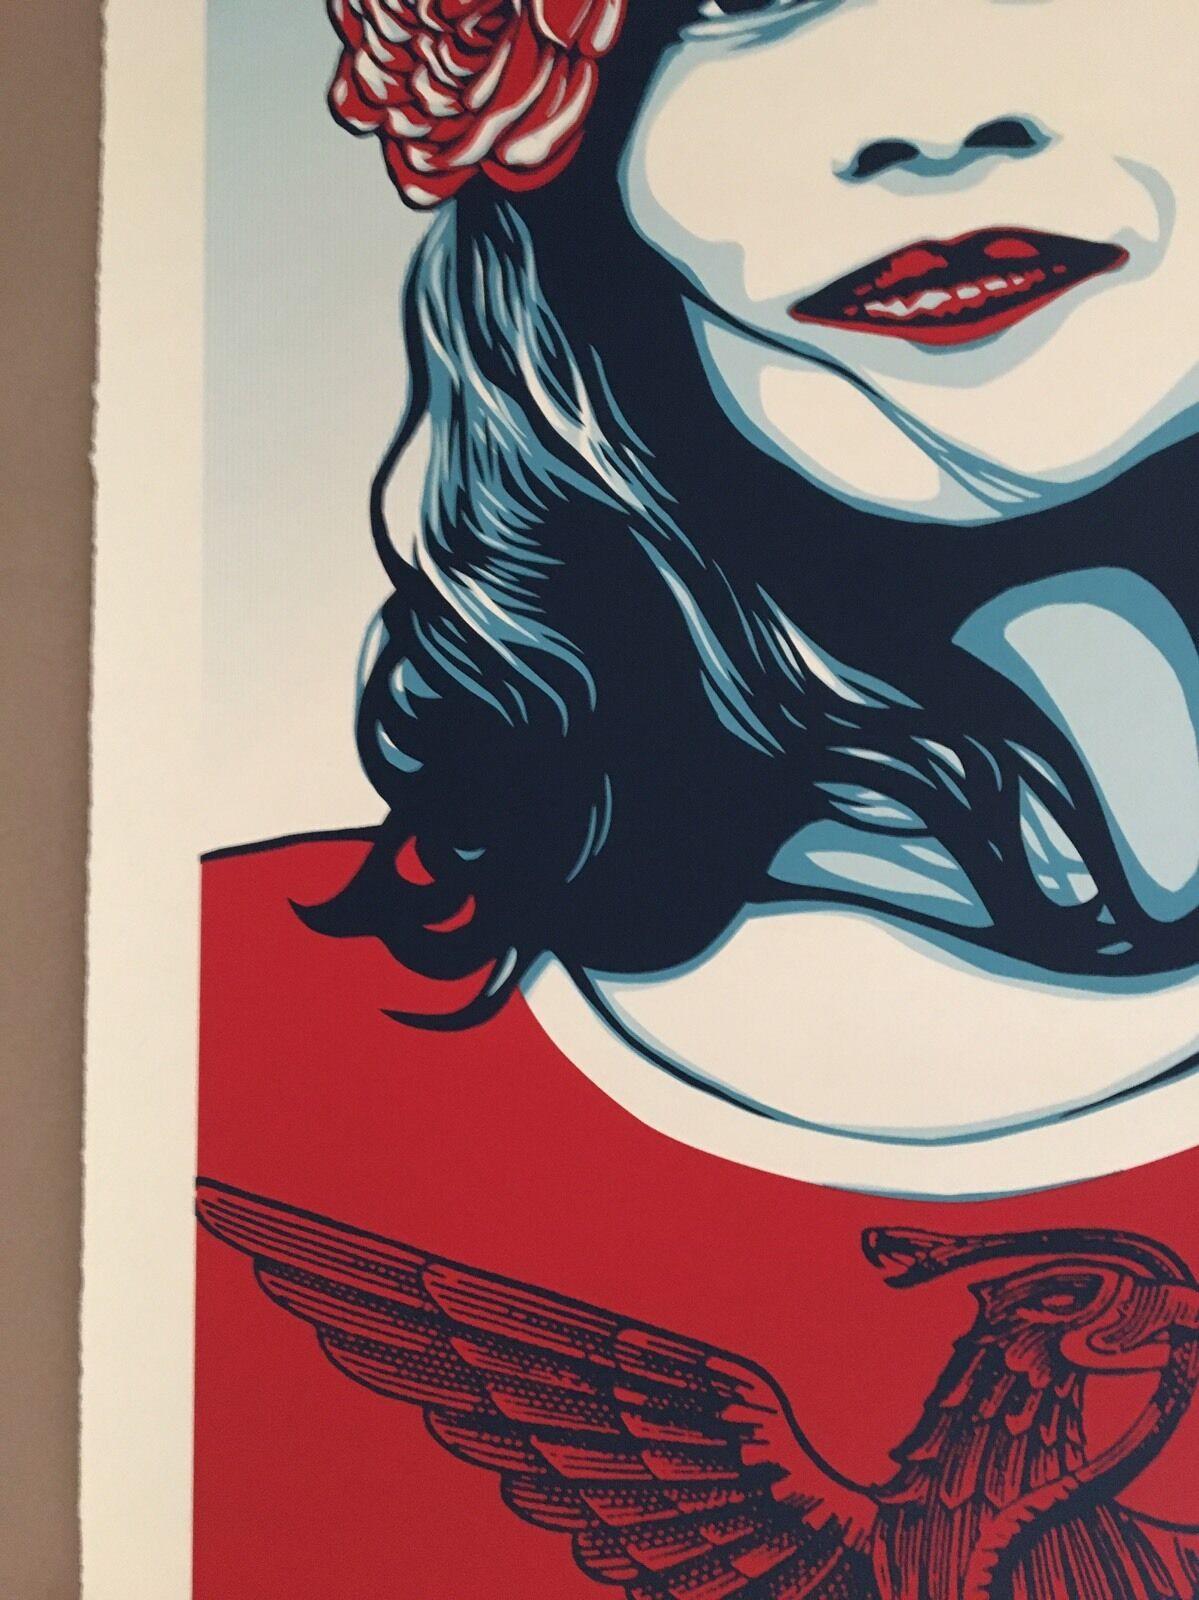 Defend Dignity
Large Format Edition
Signed and Numbered by Shepard Fairey
30